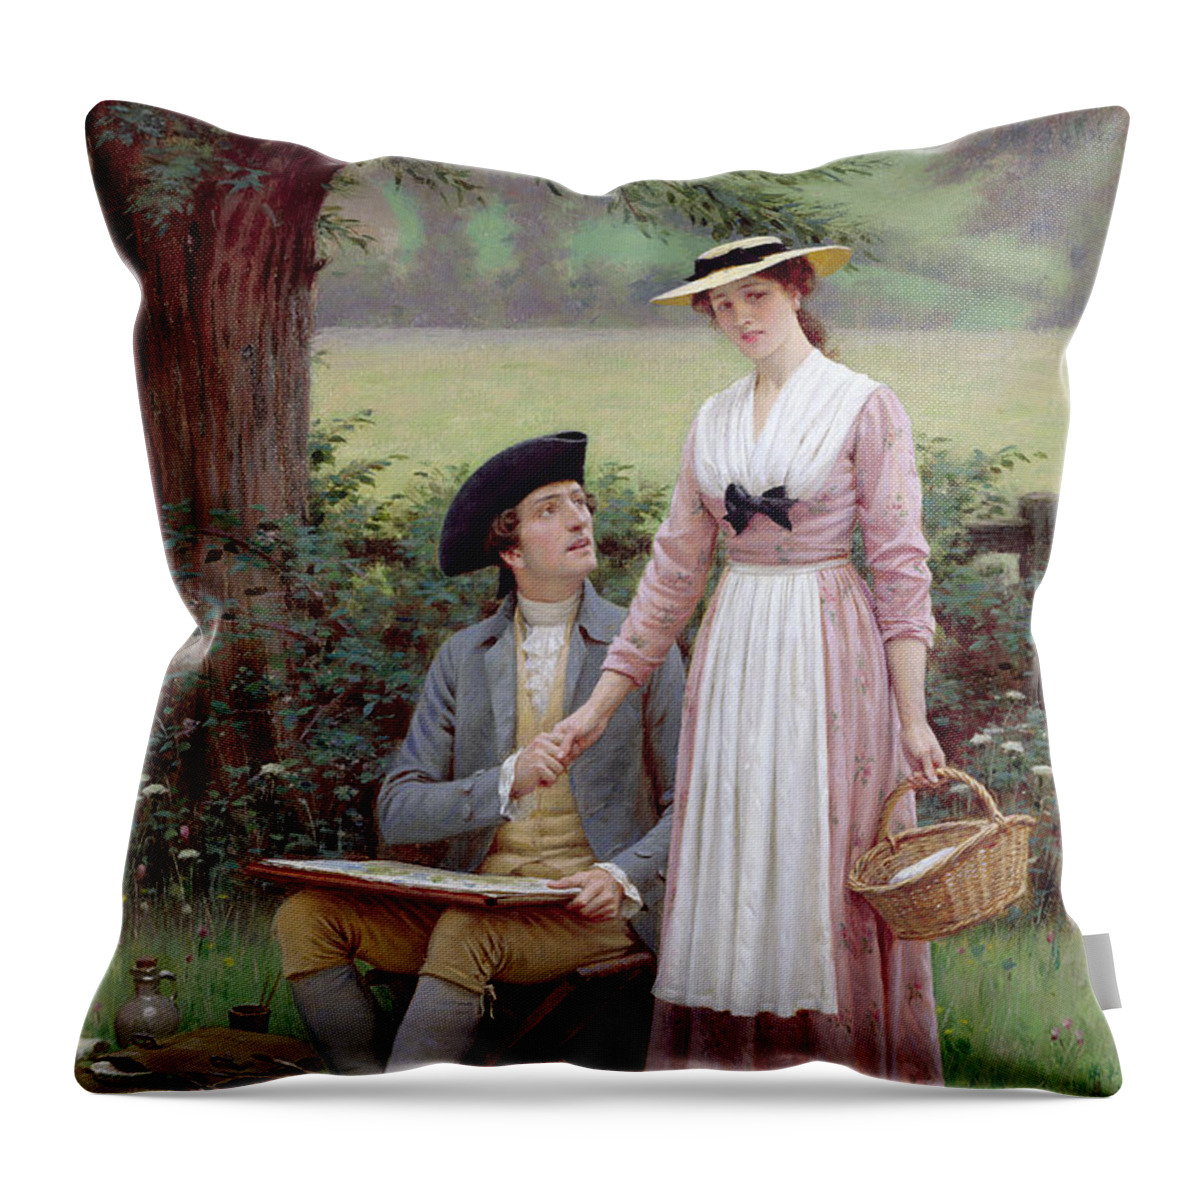 The Lord Of Burleigh Throw Pillow featuring the painting The Lord of Burleigh by Edmund Blair Leighton